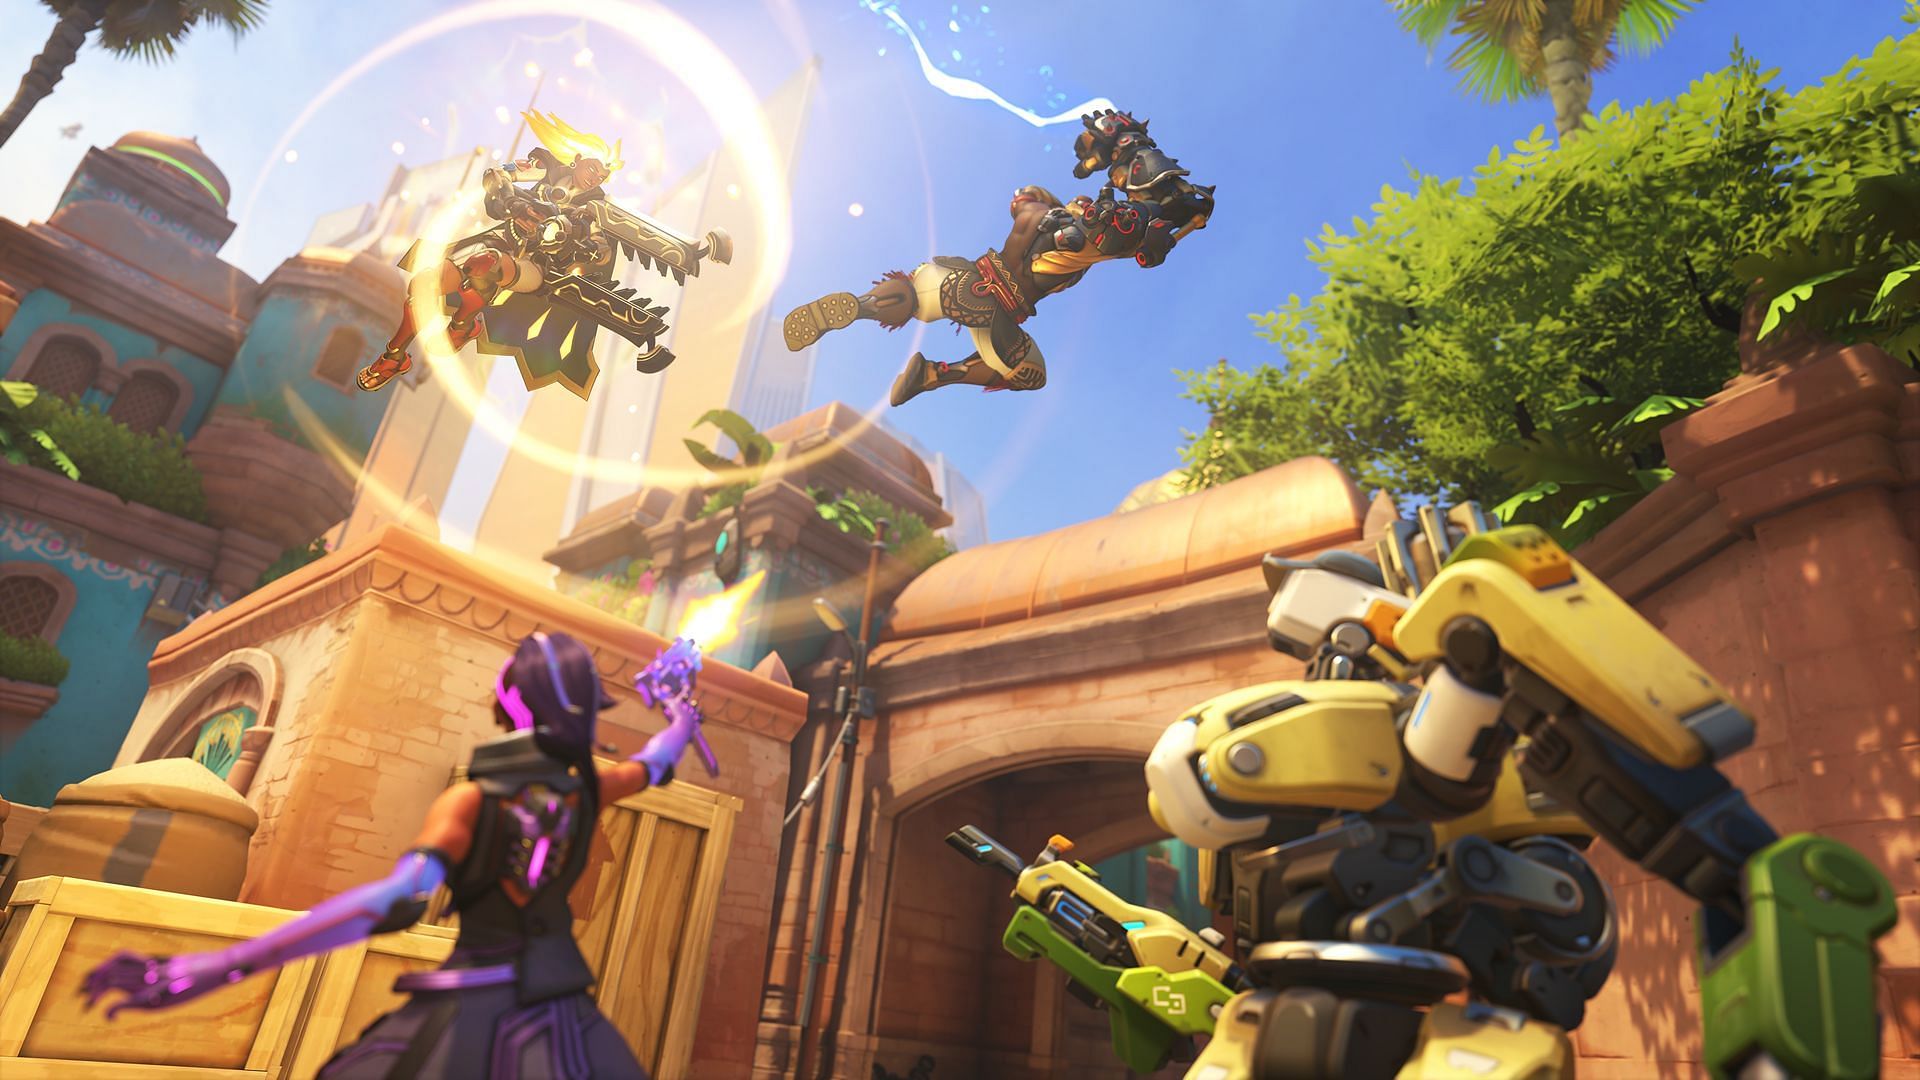 Players experience a broken autoban system in Overwatch (Image via Blizzard)